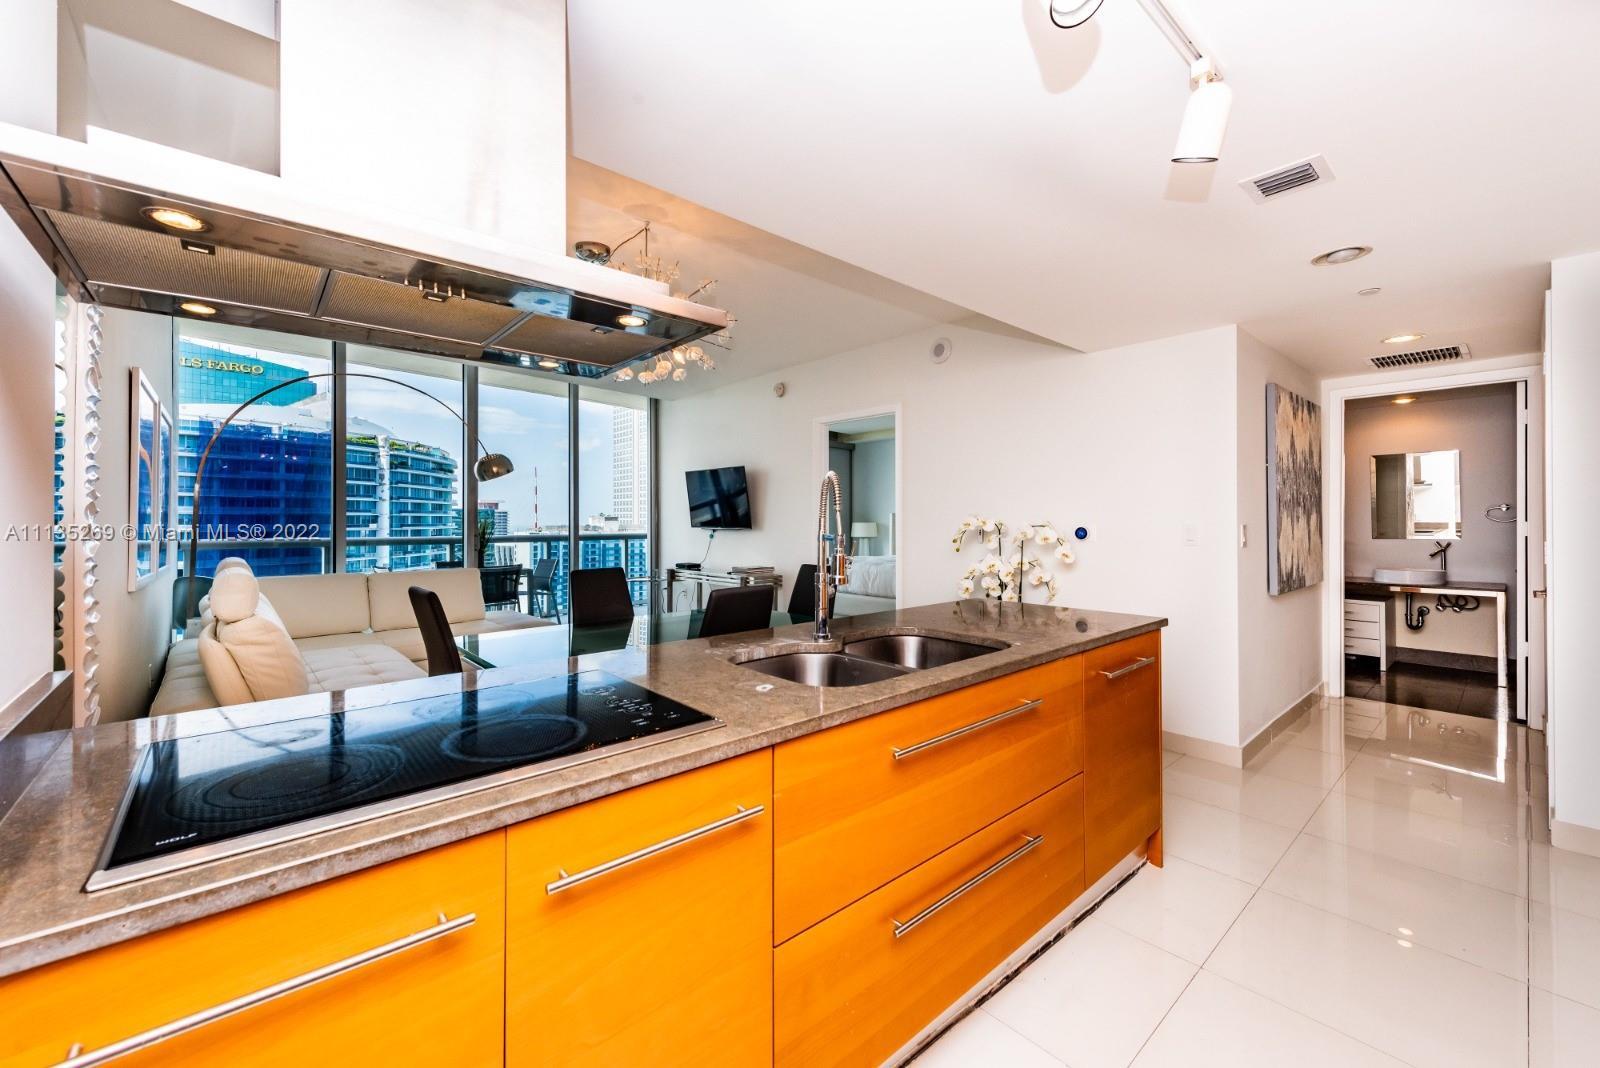 Short term rentals allowed!  Spectacular Penthouse 1/1  Fully Furnished, breathtaking water & skylin